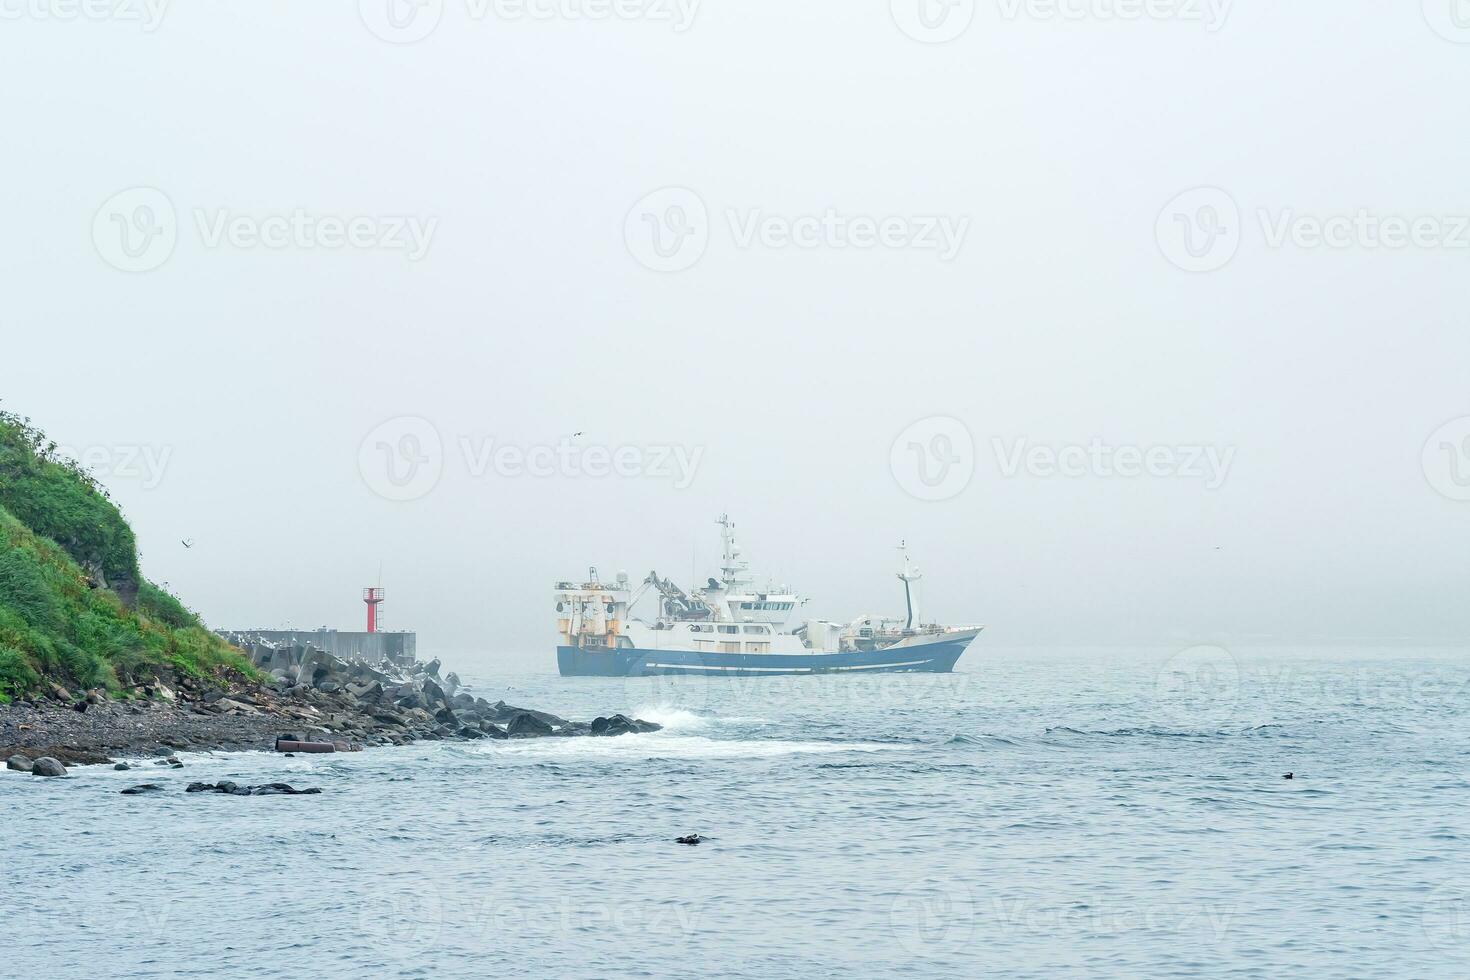 fishing vessel emerges from behind a cape with a lighthouse, sailing into a foggy sea photo